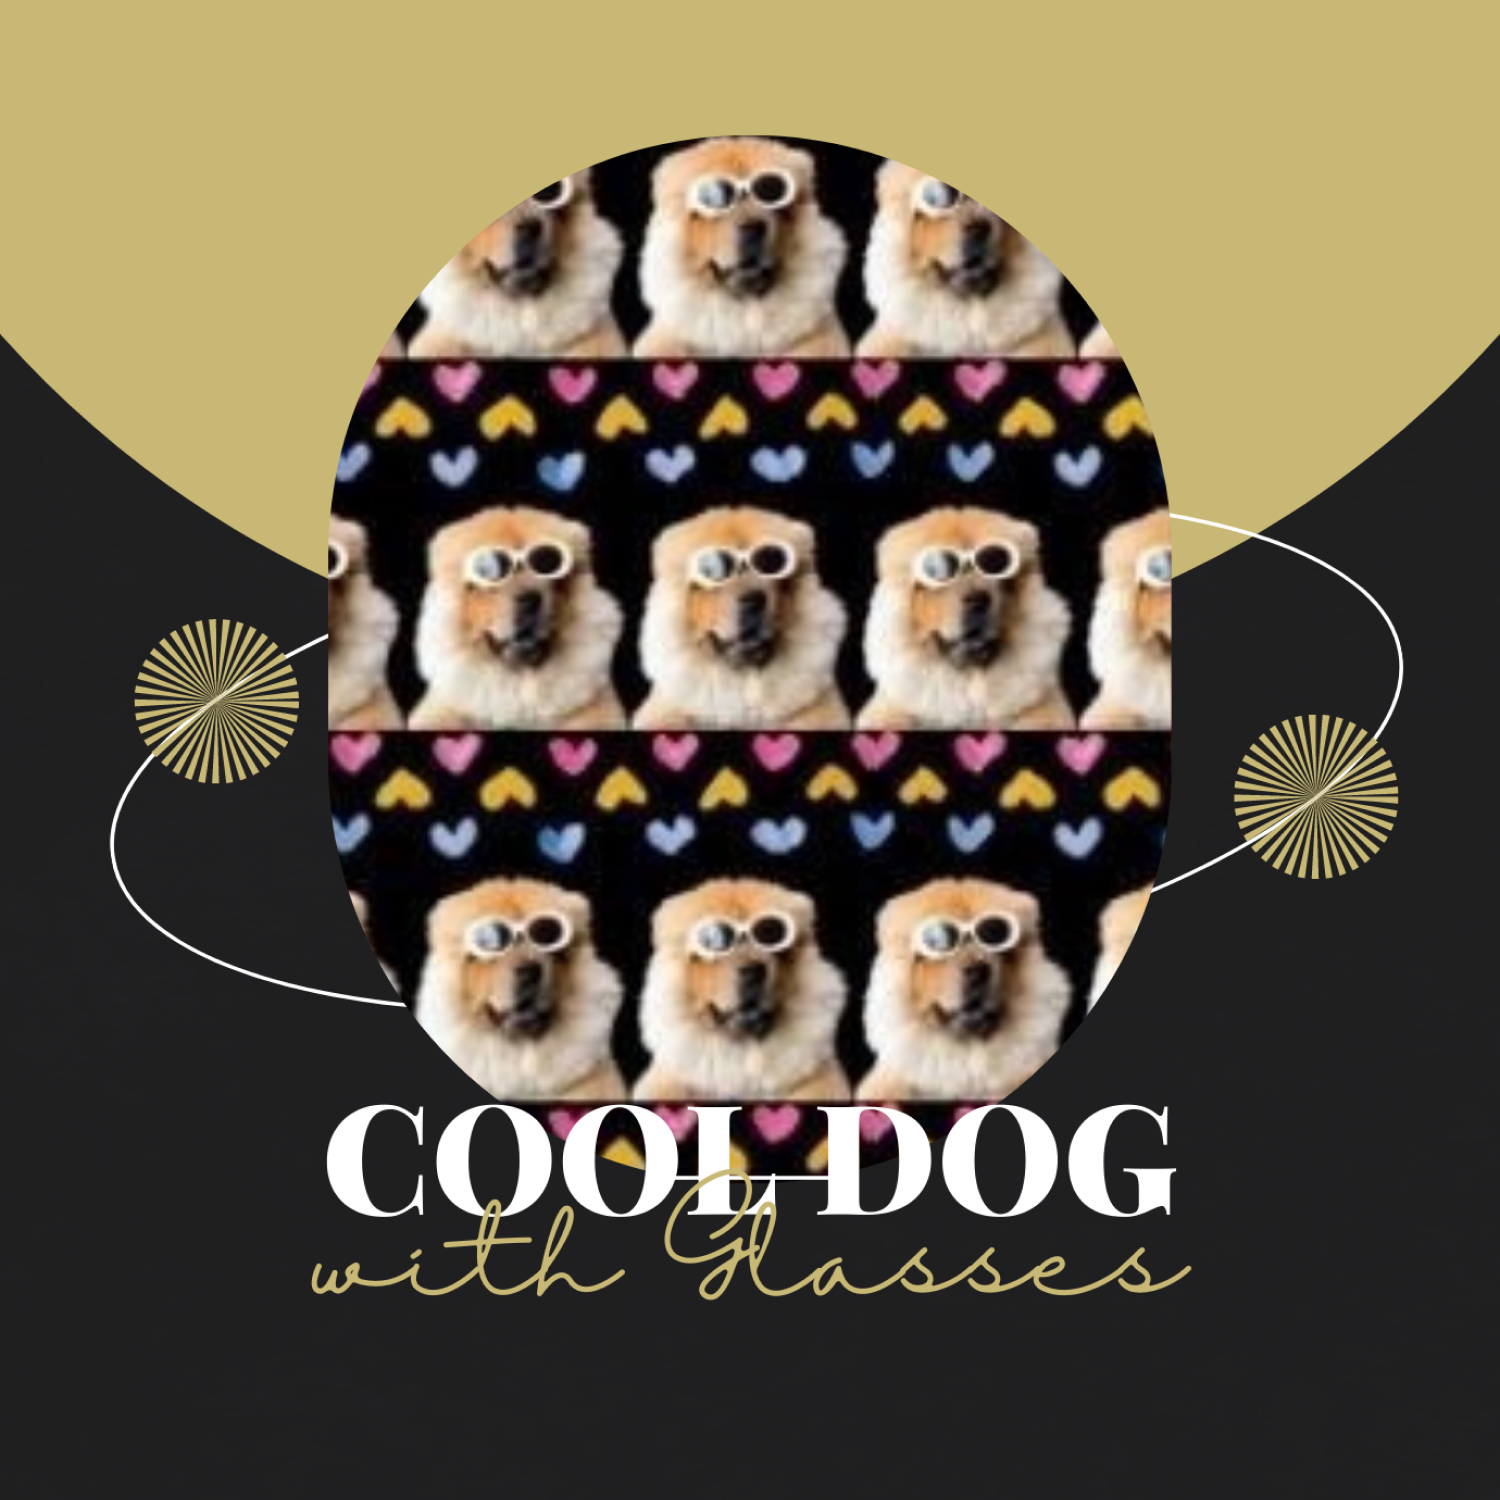 Funny, Cool Dog with Glasses Pattern.